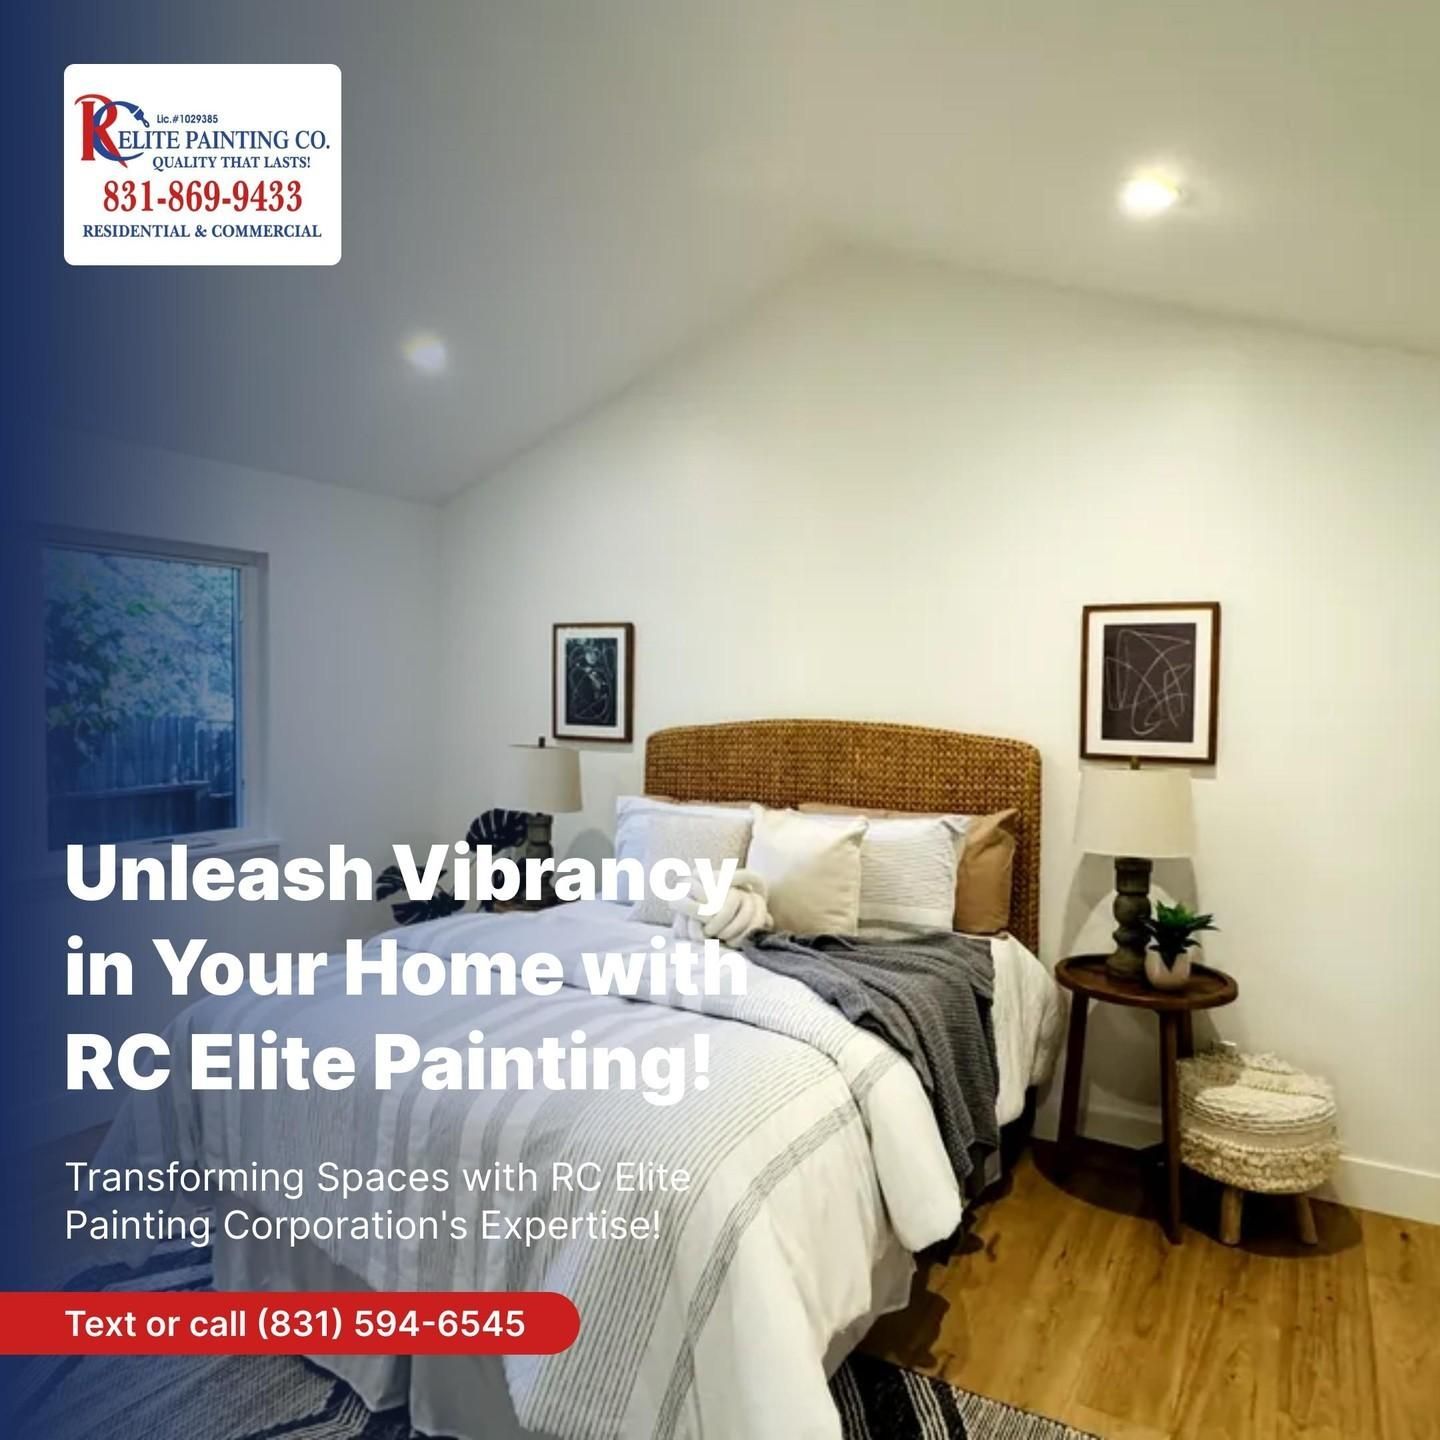  for RC Elite Painting Corporation  in Castroville, CA